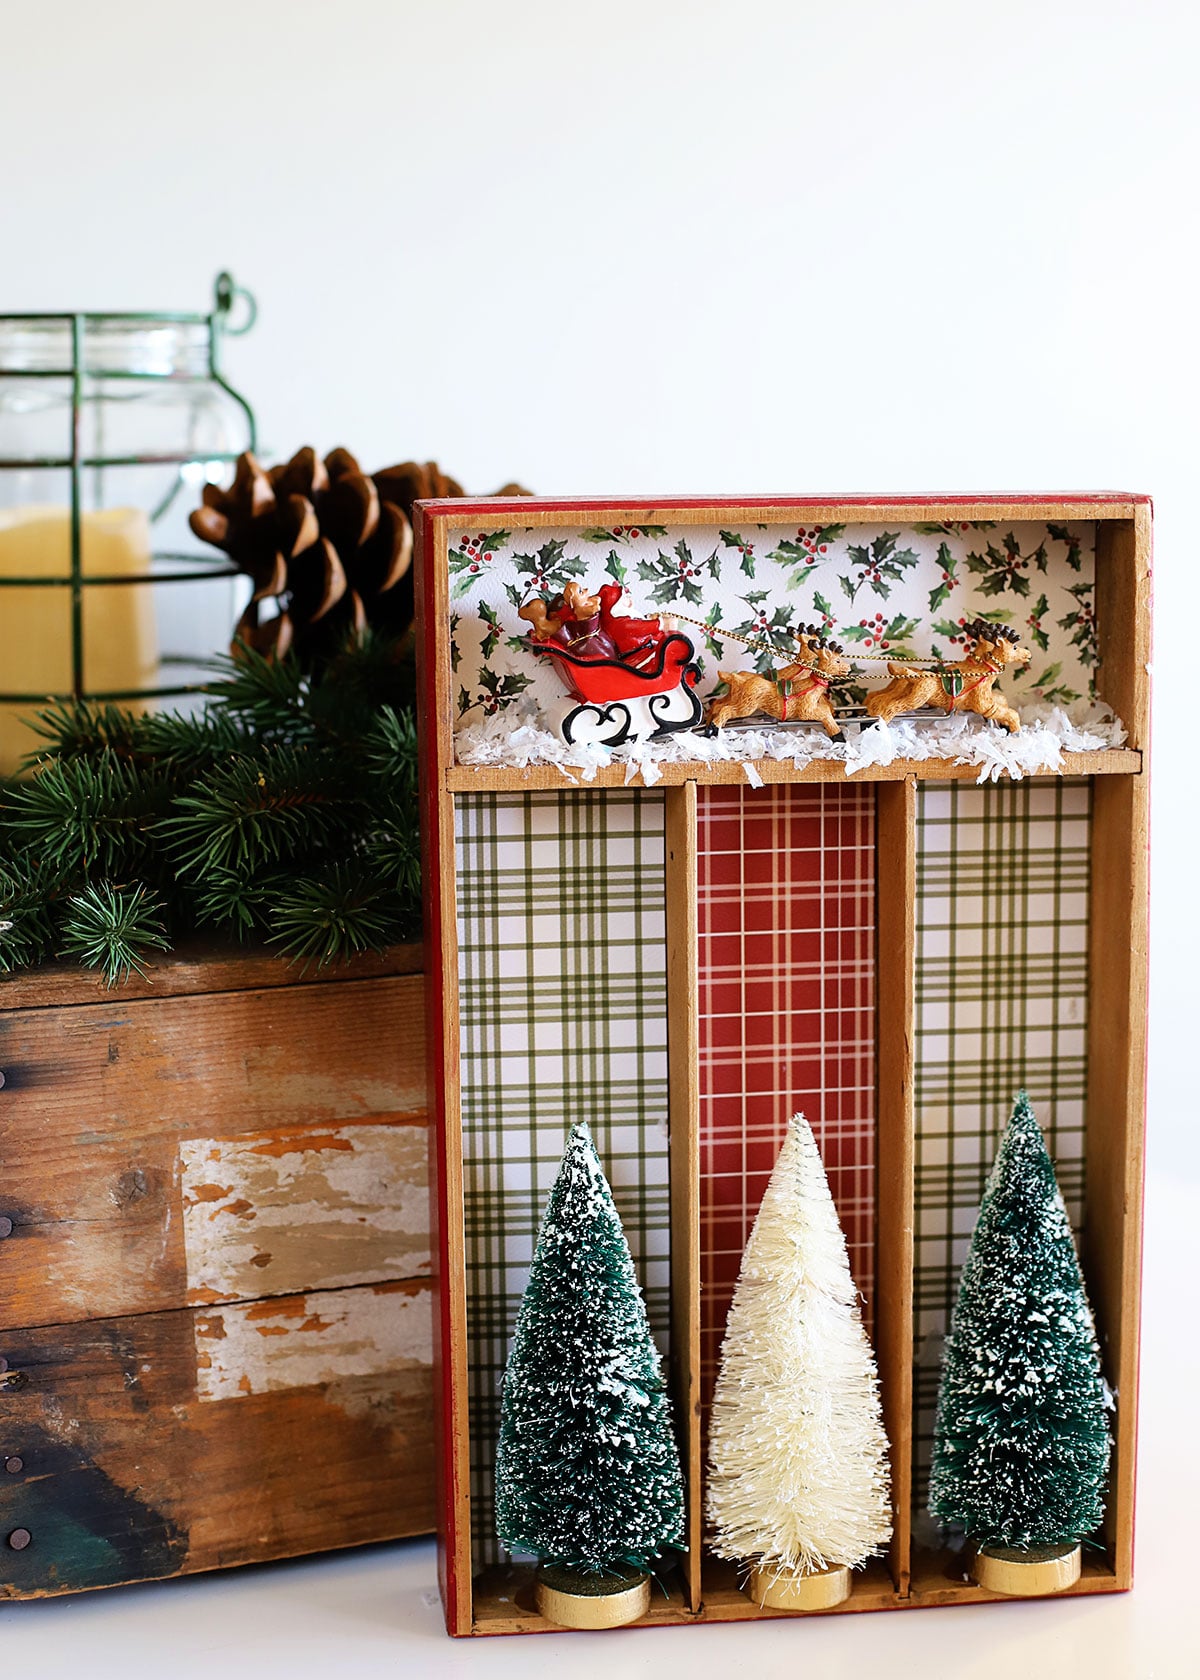 Upcycled Christmas Decor from thrift store silverware tray